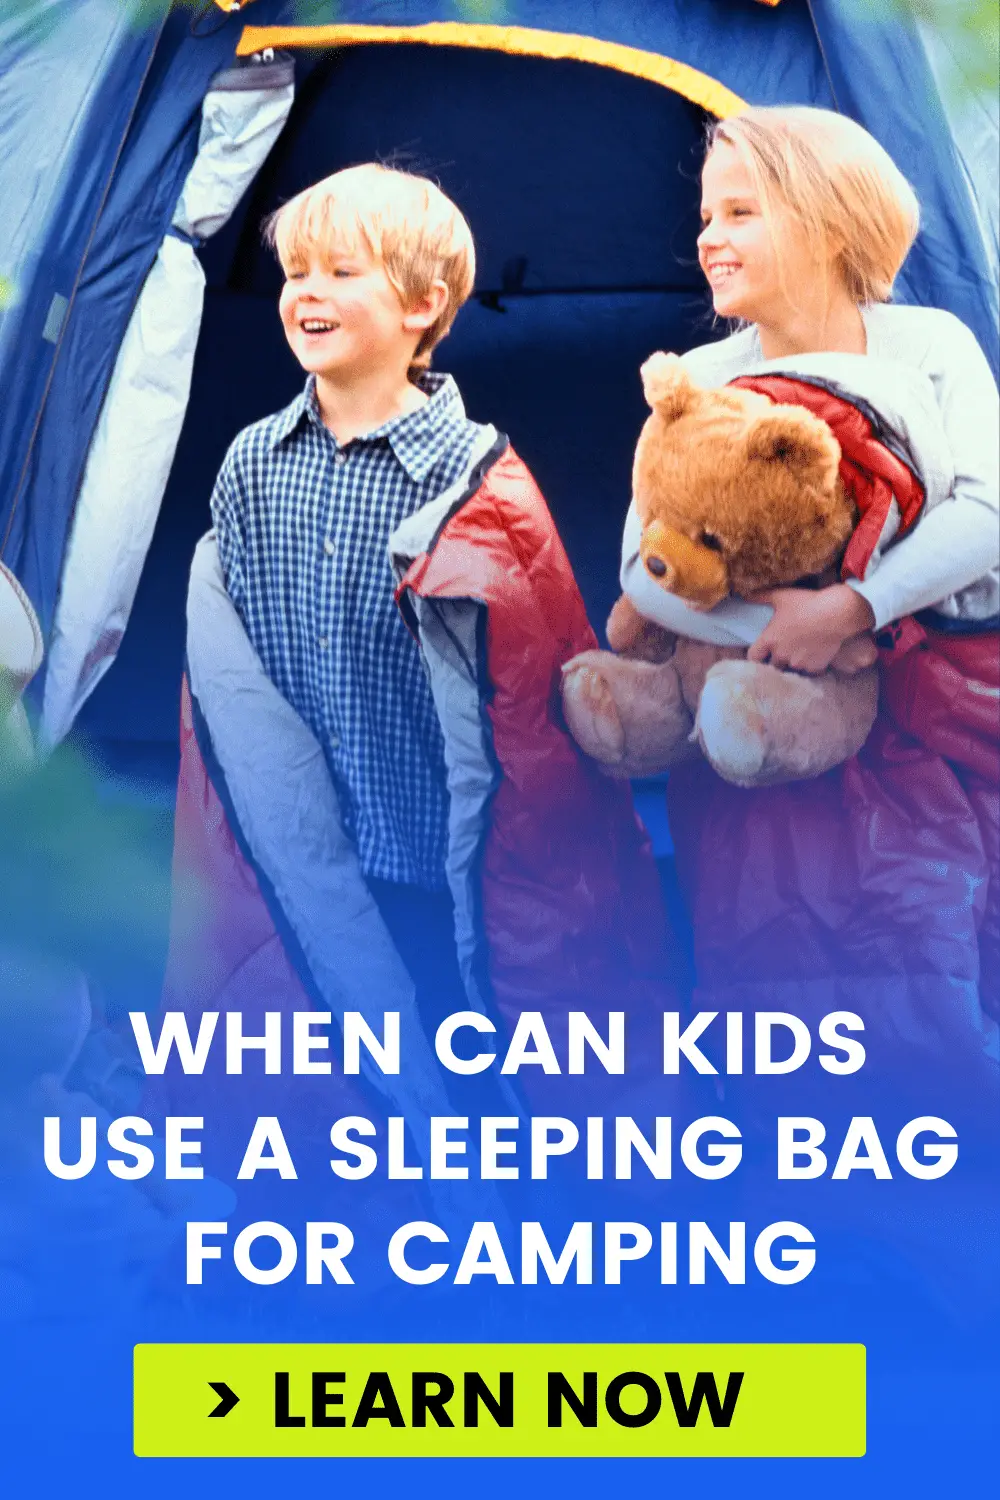 When can Kids use sleeping bags for camping